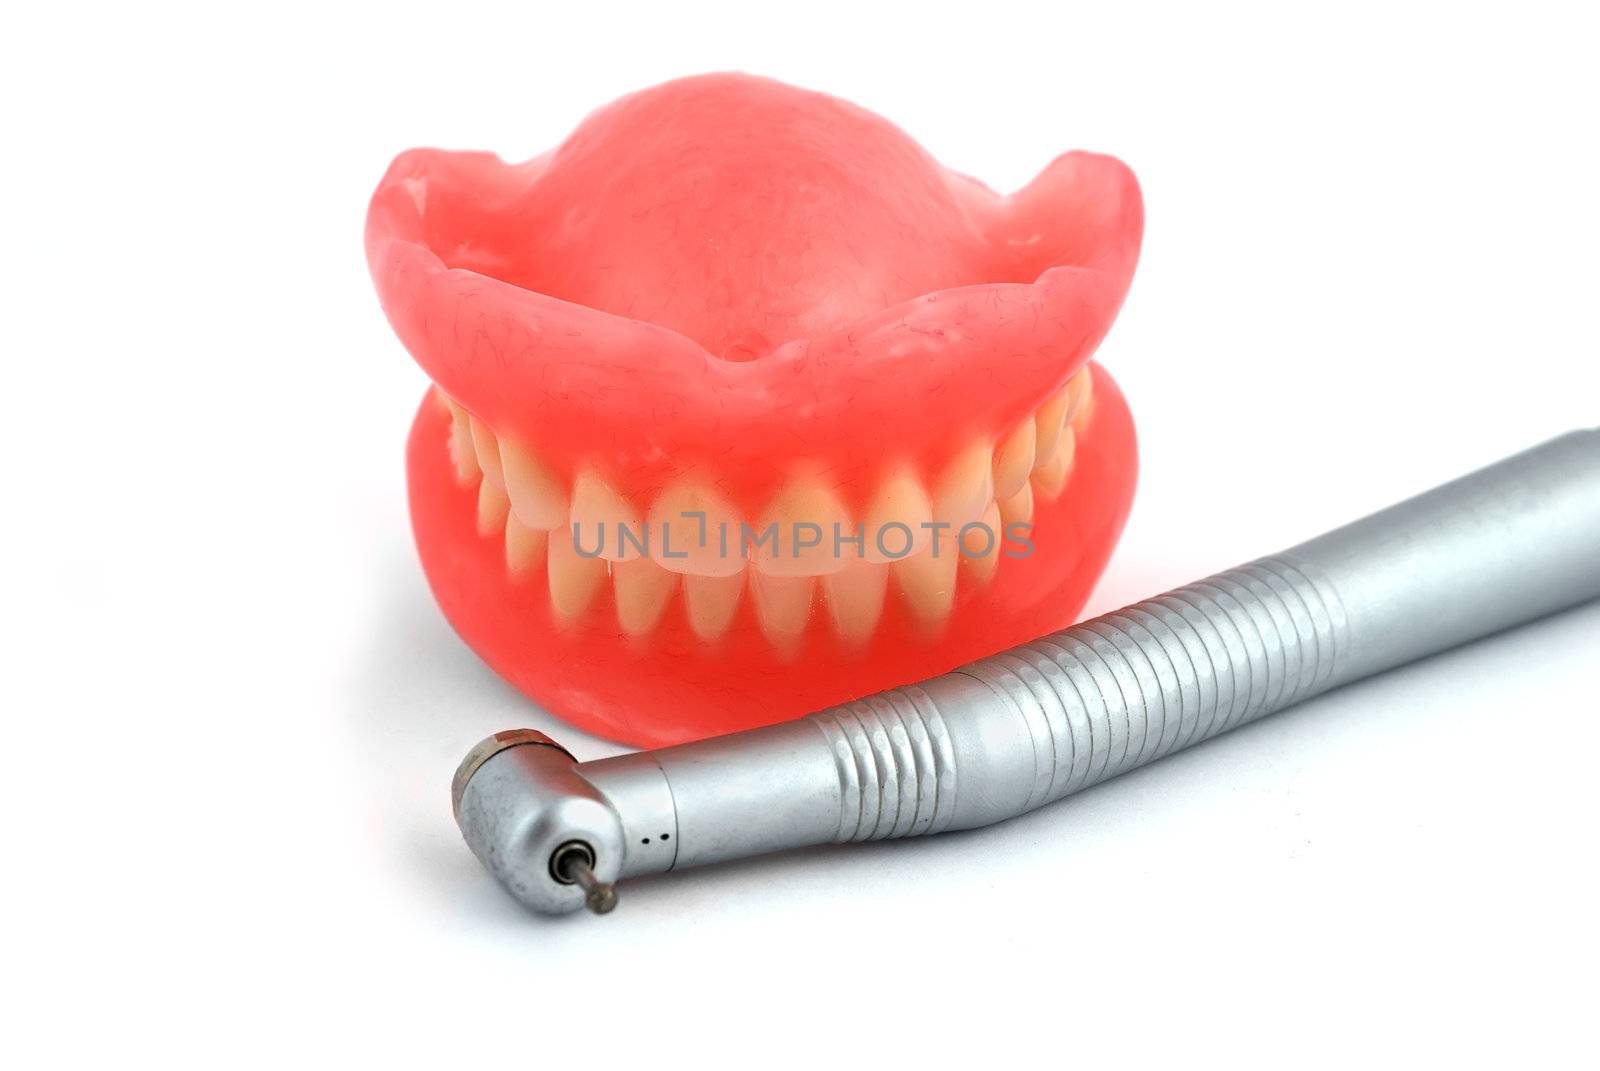 dentures and handpiece on white background